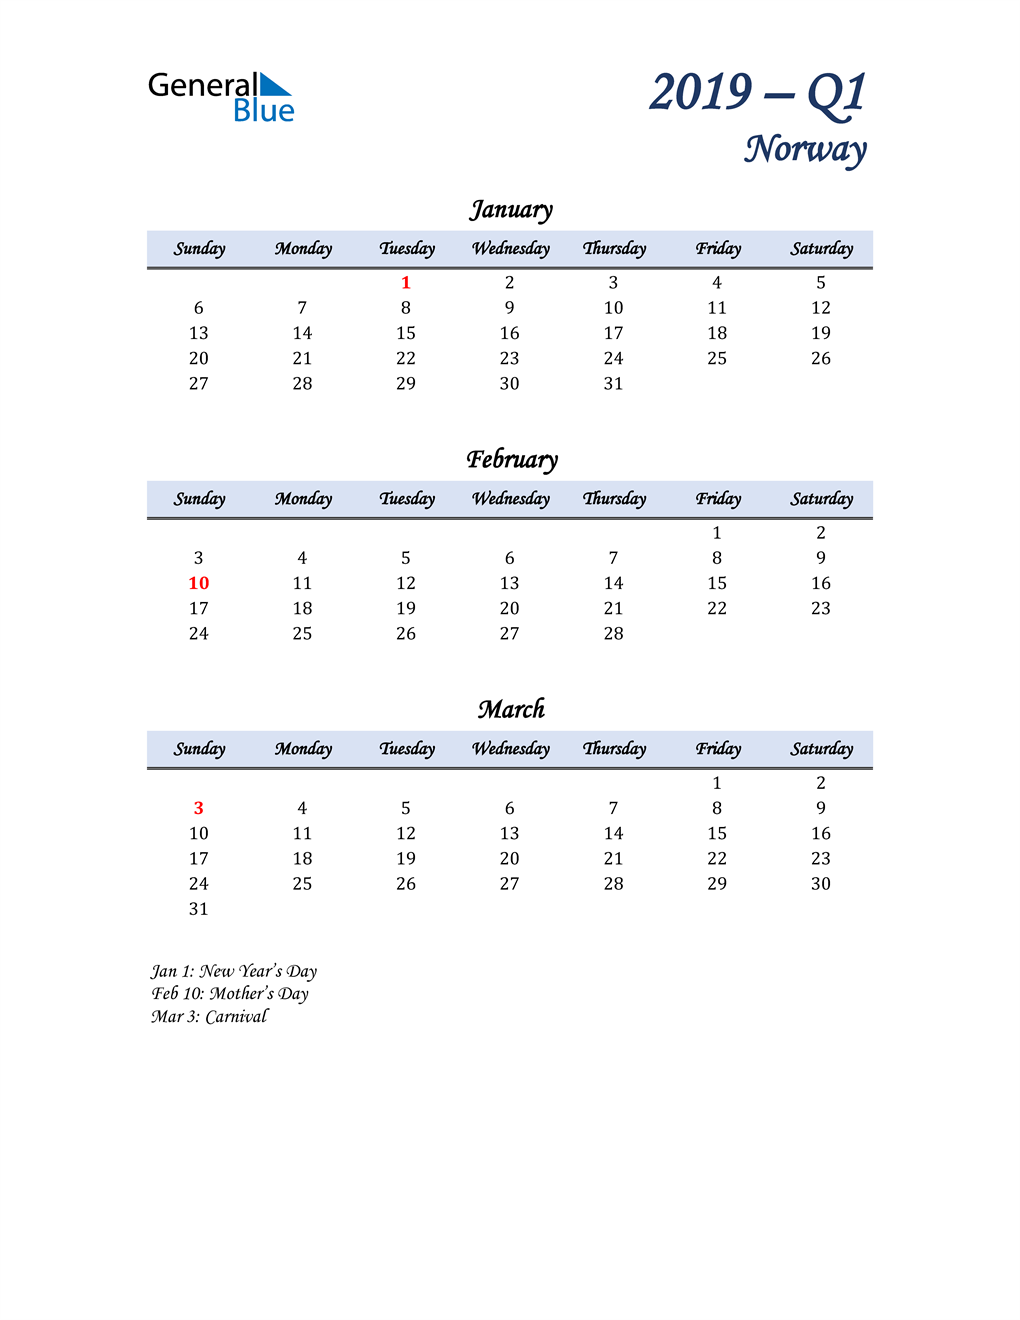  January, February, and March Calendar for Norway